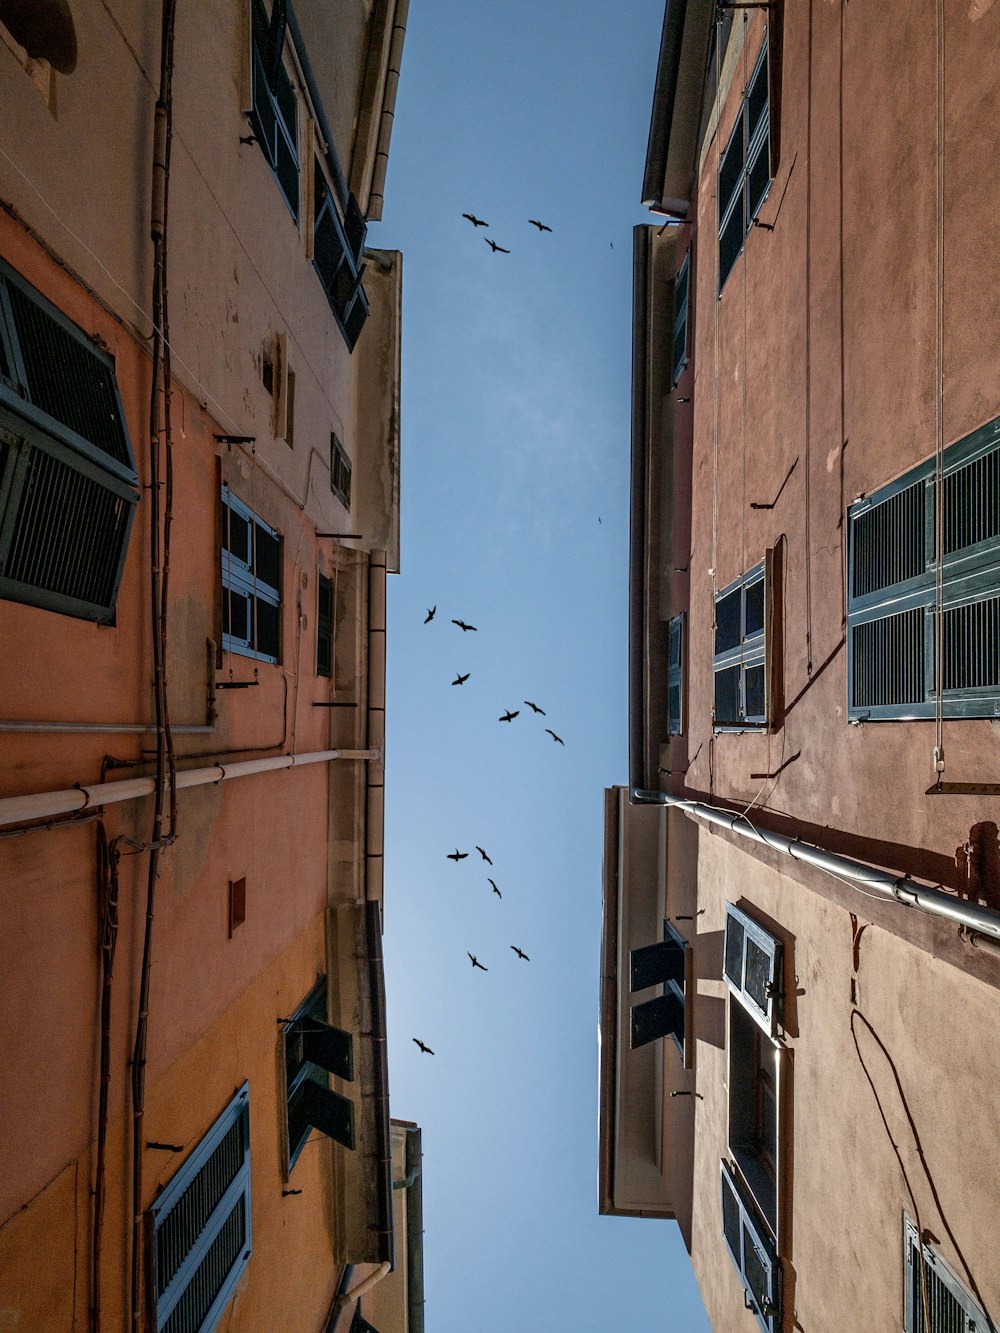 flock of birds flying over the buildings in low angle photography